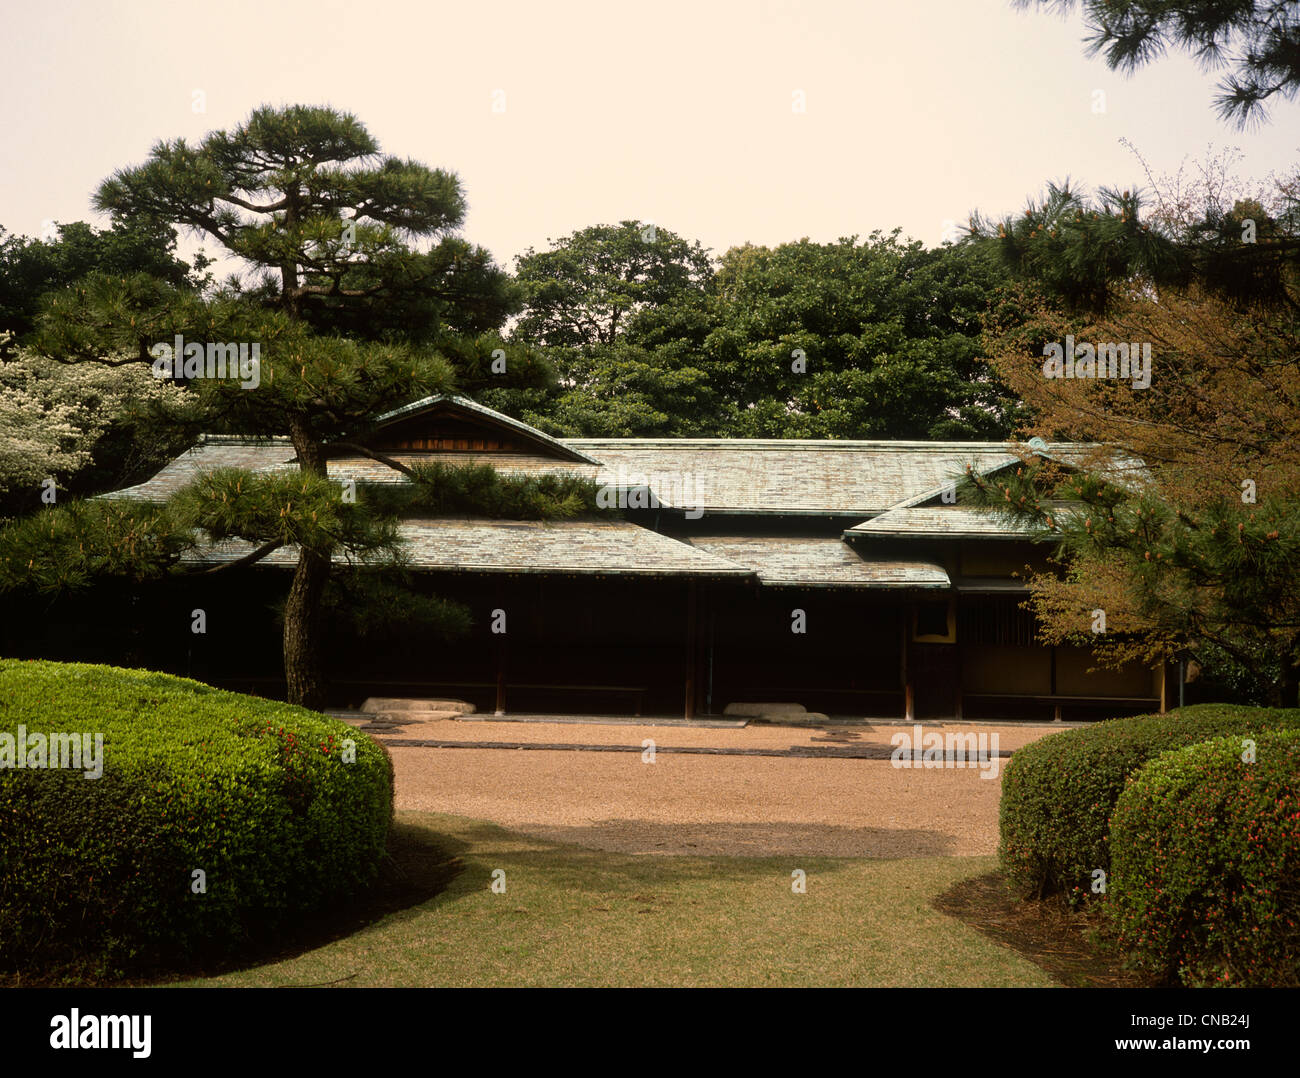 Giappone Tokyo Imperial Palace Garden Teahouse Foto Stock